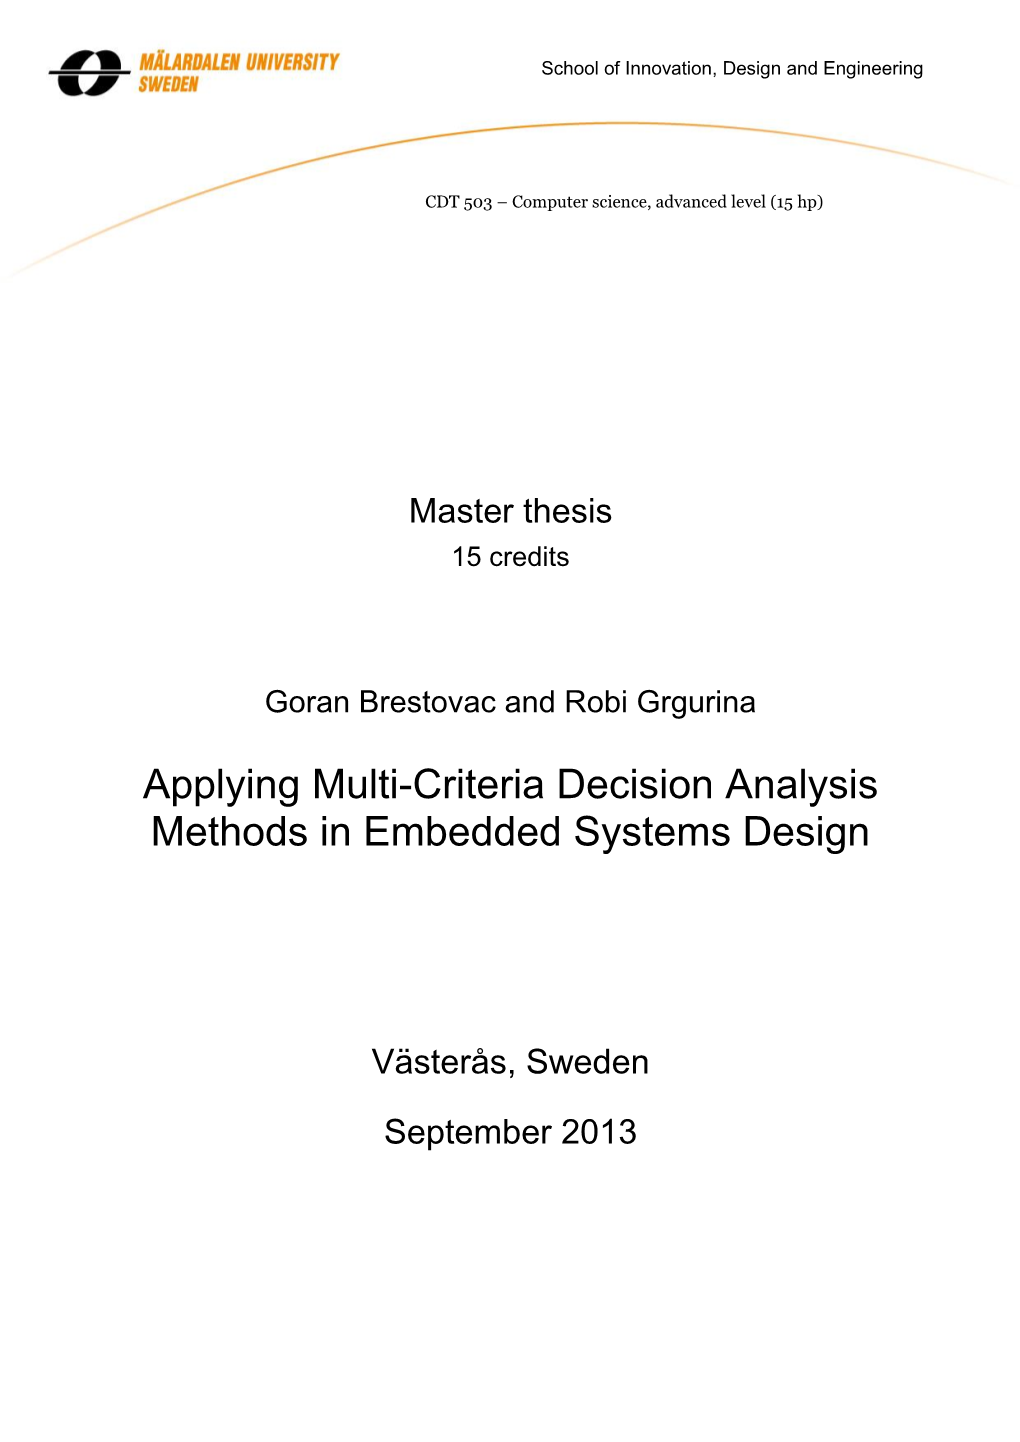 Applying Multi-Criteria Decision Analysis Methods in Embedded Systems Design